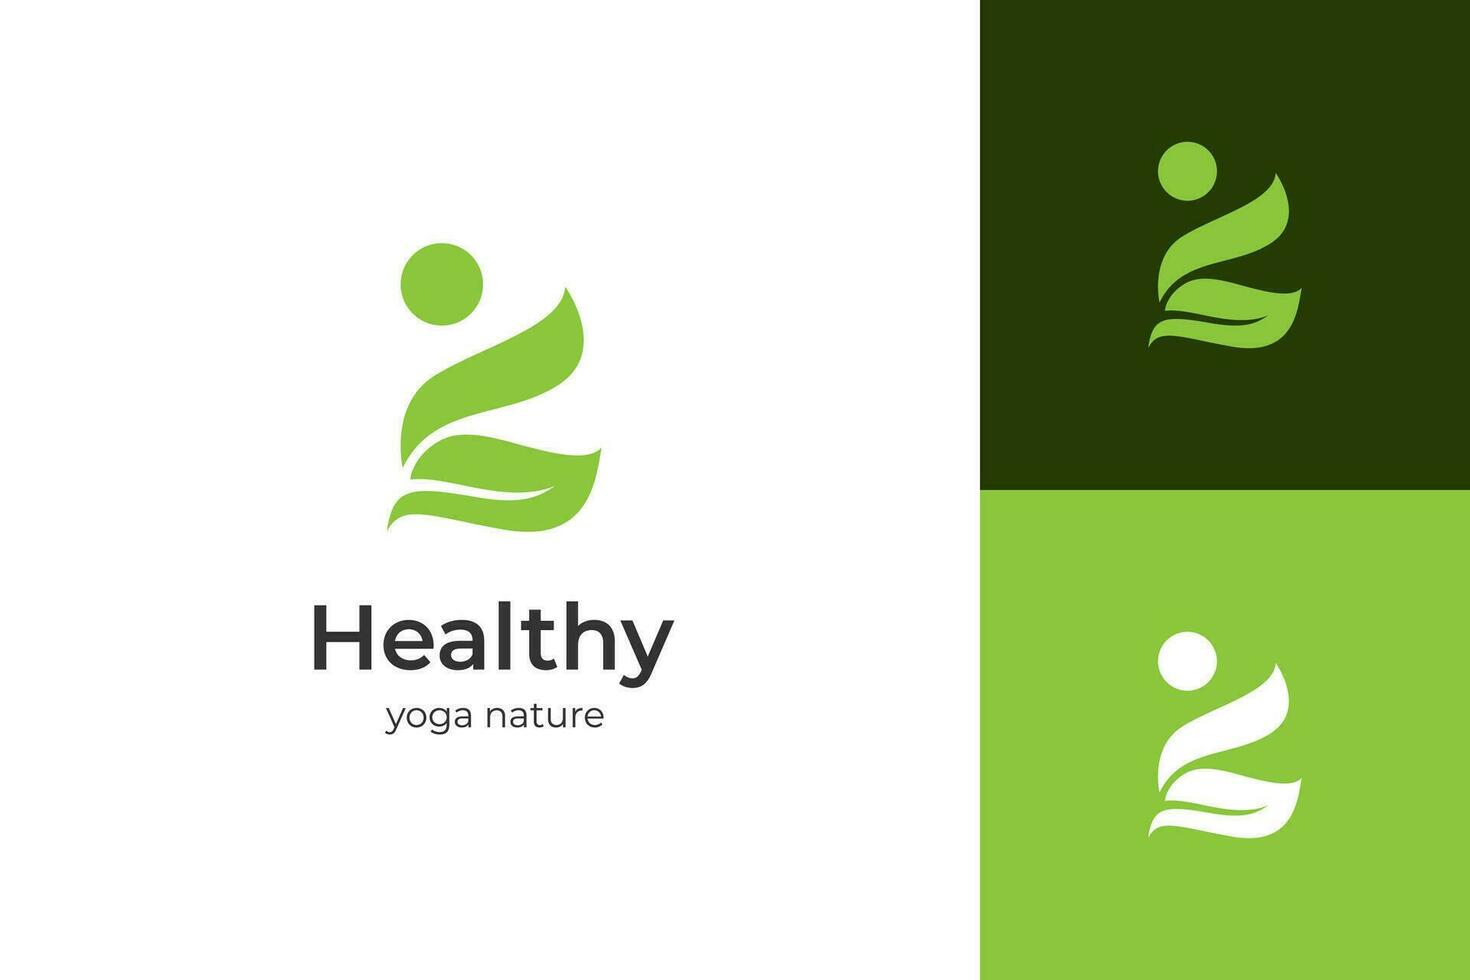 nature health yoga pose and relax logo icon design with leaf symbol vector